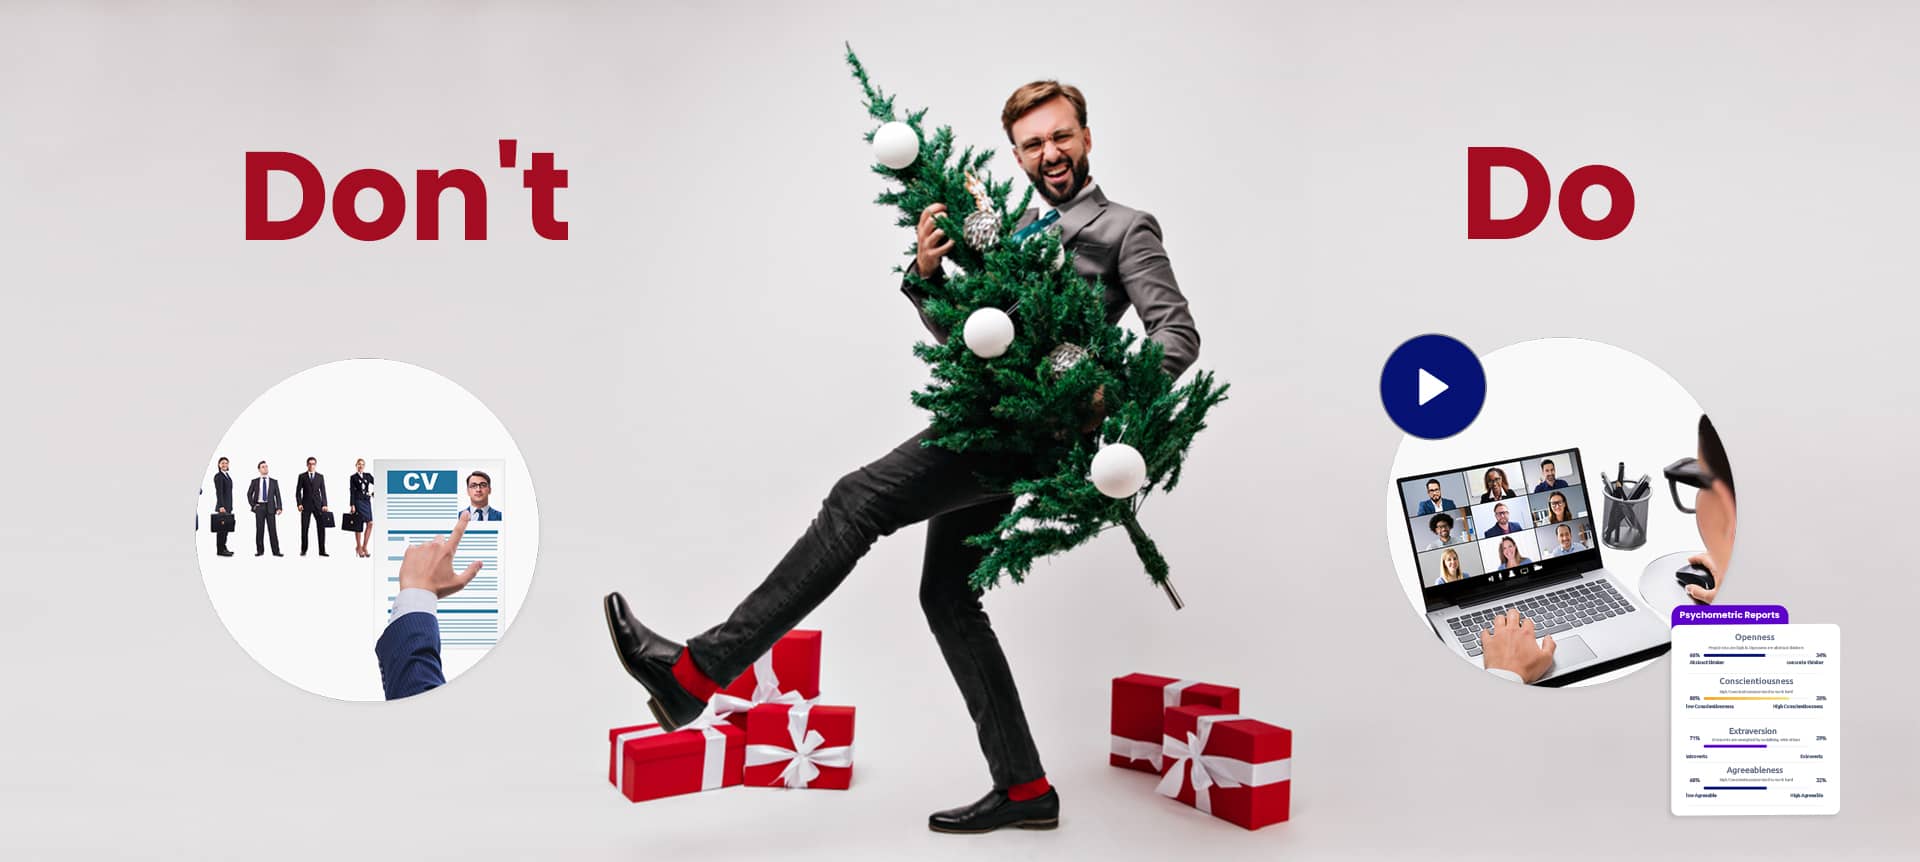 Talent Acquisition: 6 Important Do’s and Don’ts for This Christmas Season